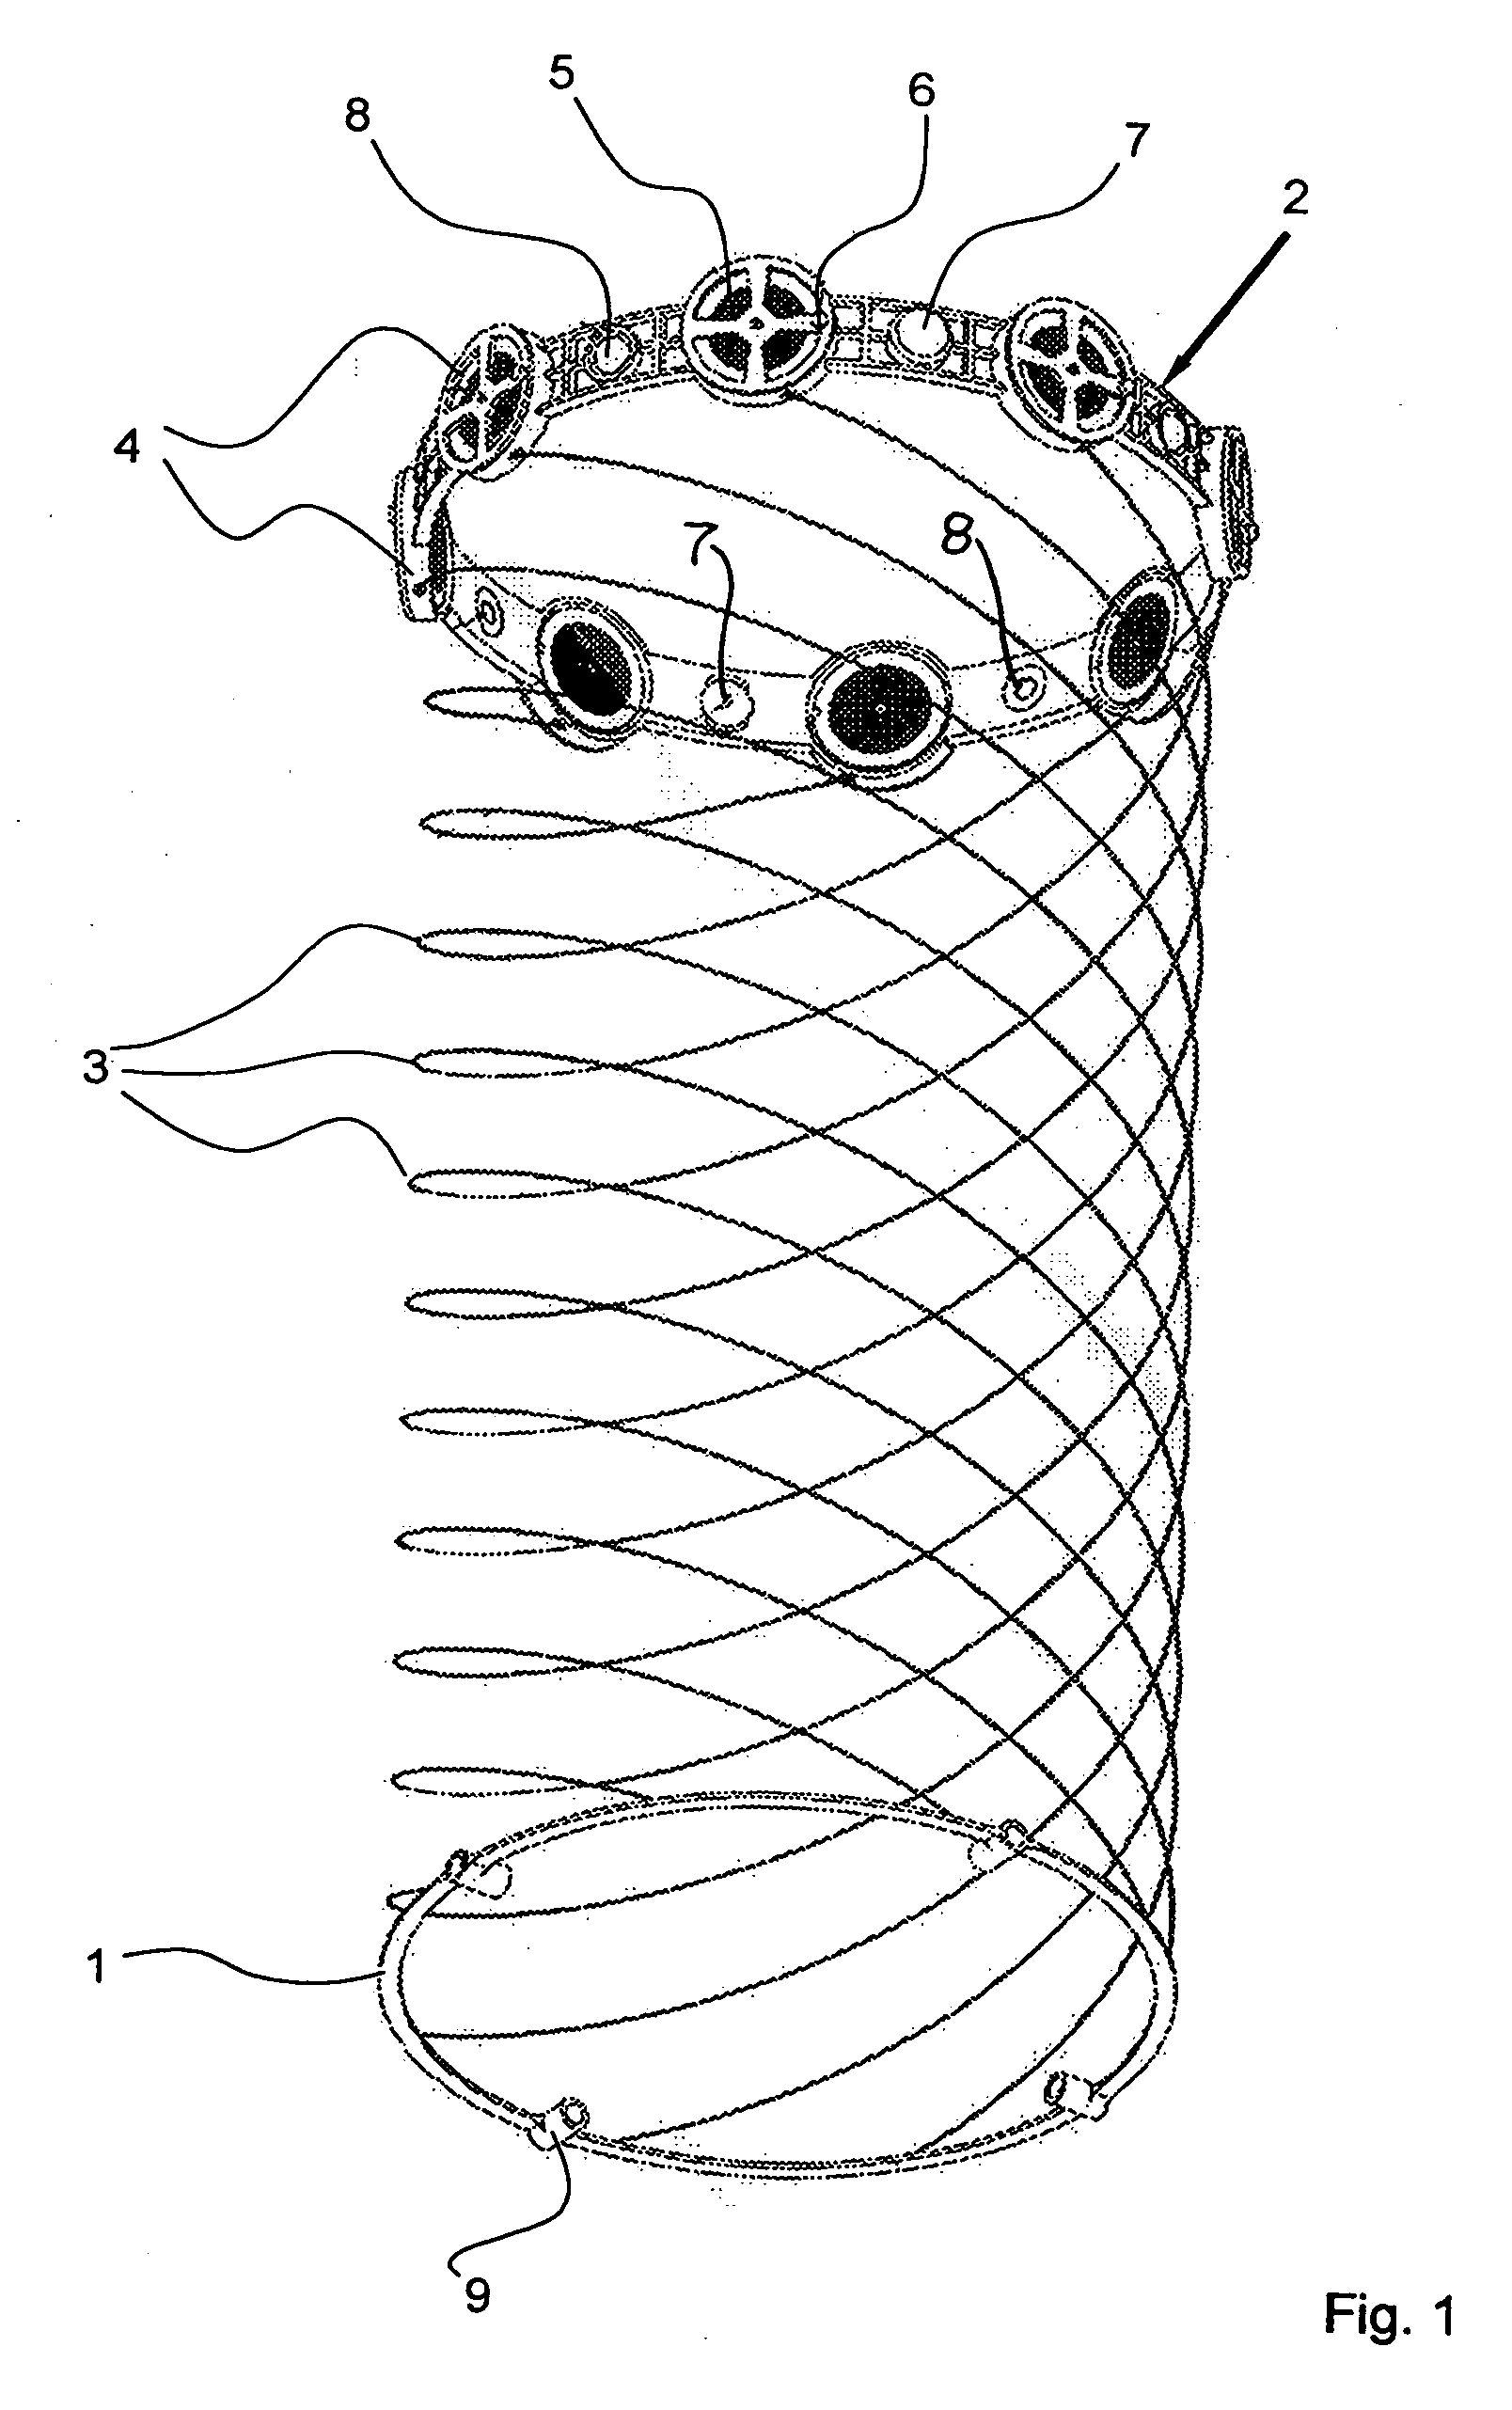 Apparatus with helical tension cables for ejecting a spin-stabilized body from a spacecraft